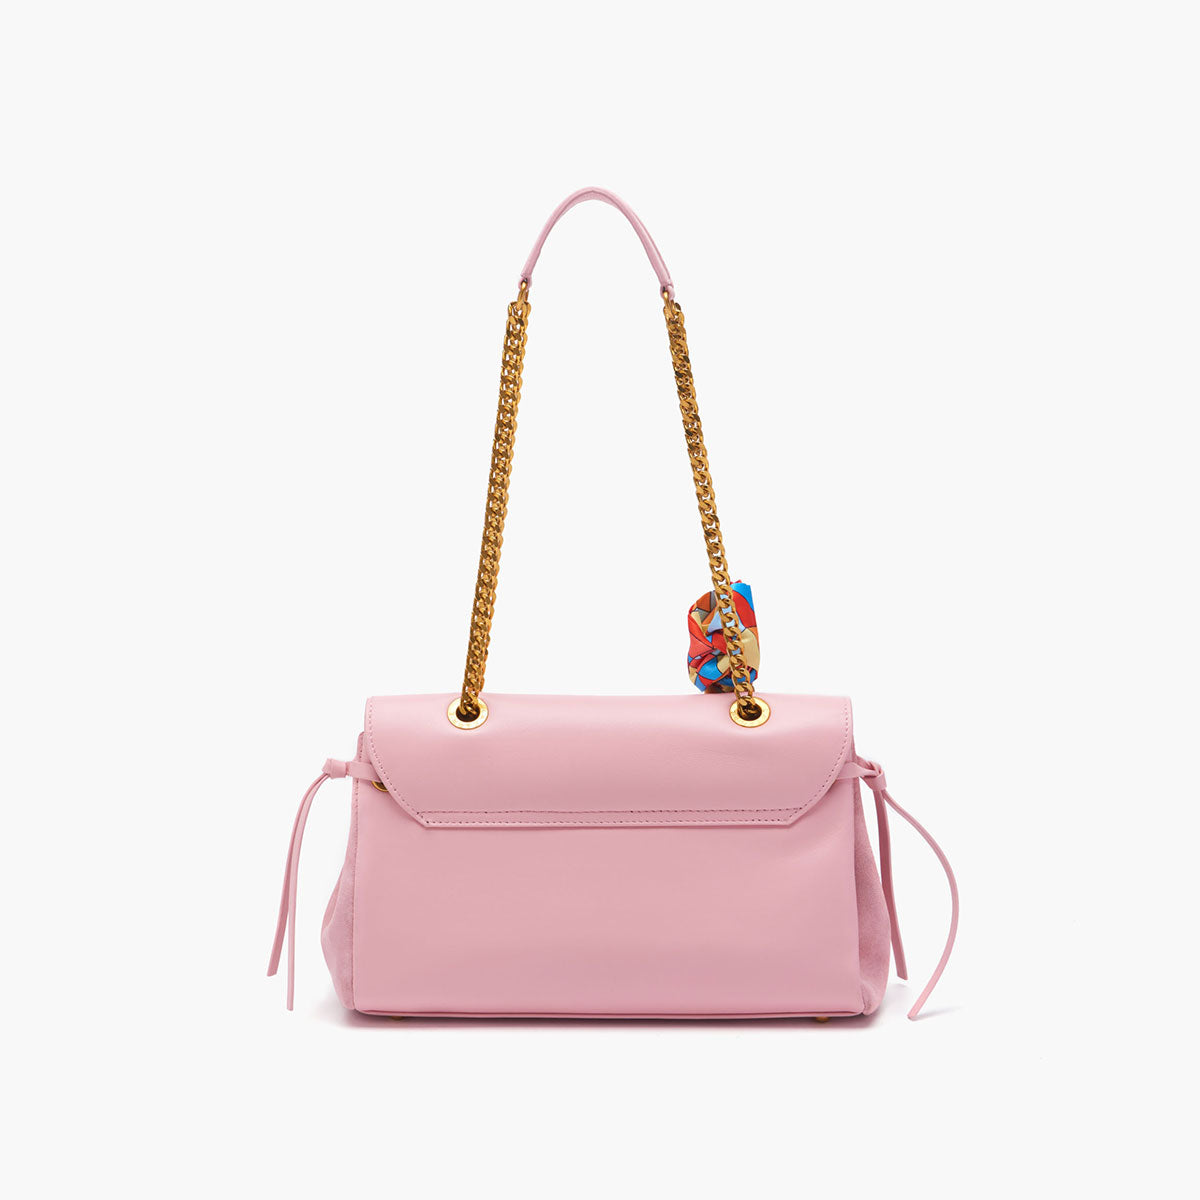 The Carrie Bag Transition Bag